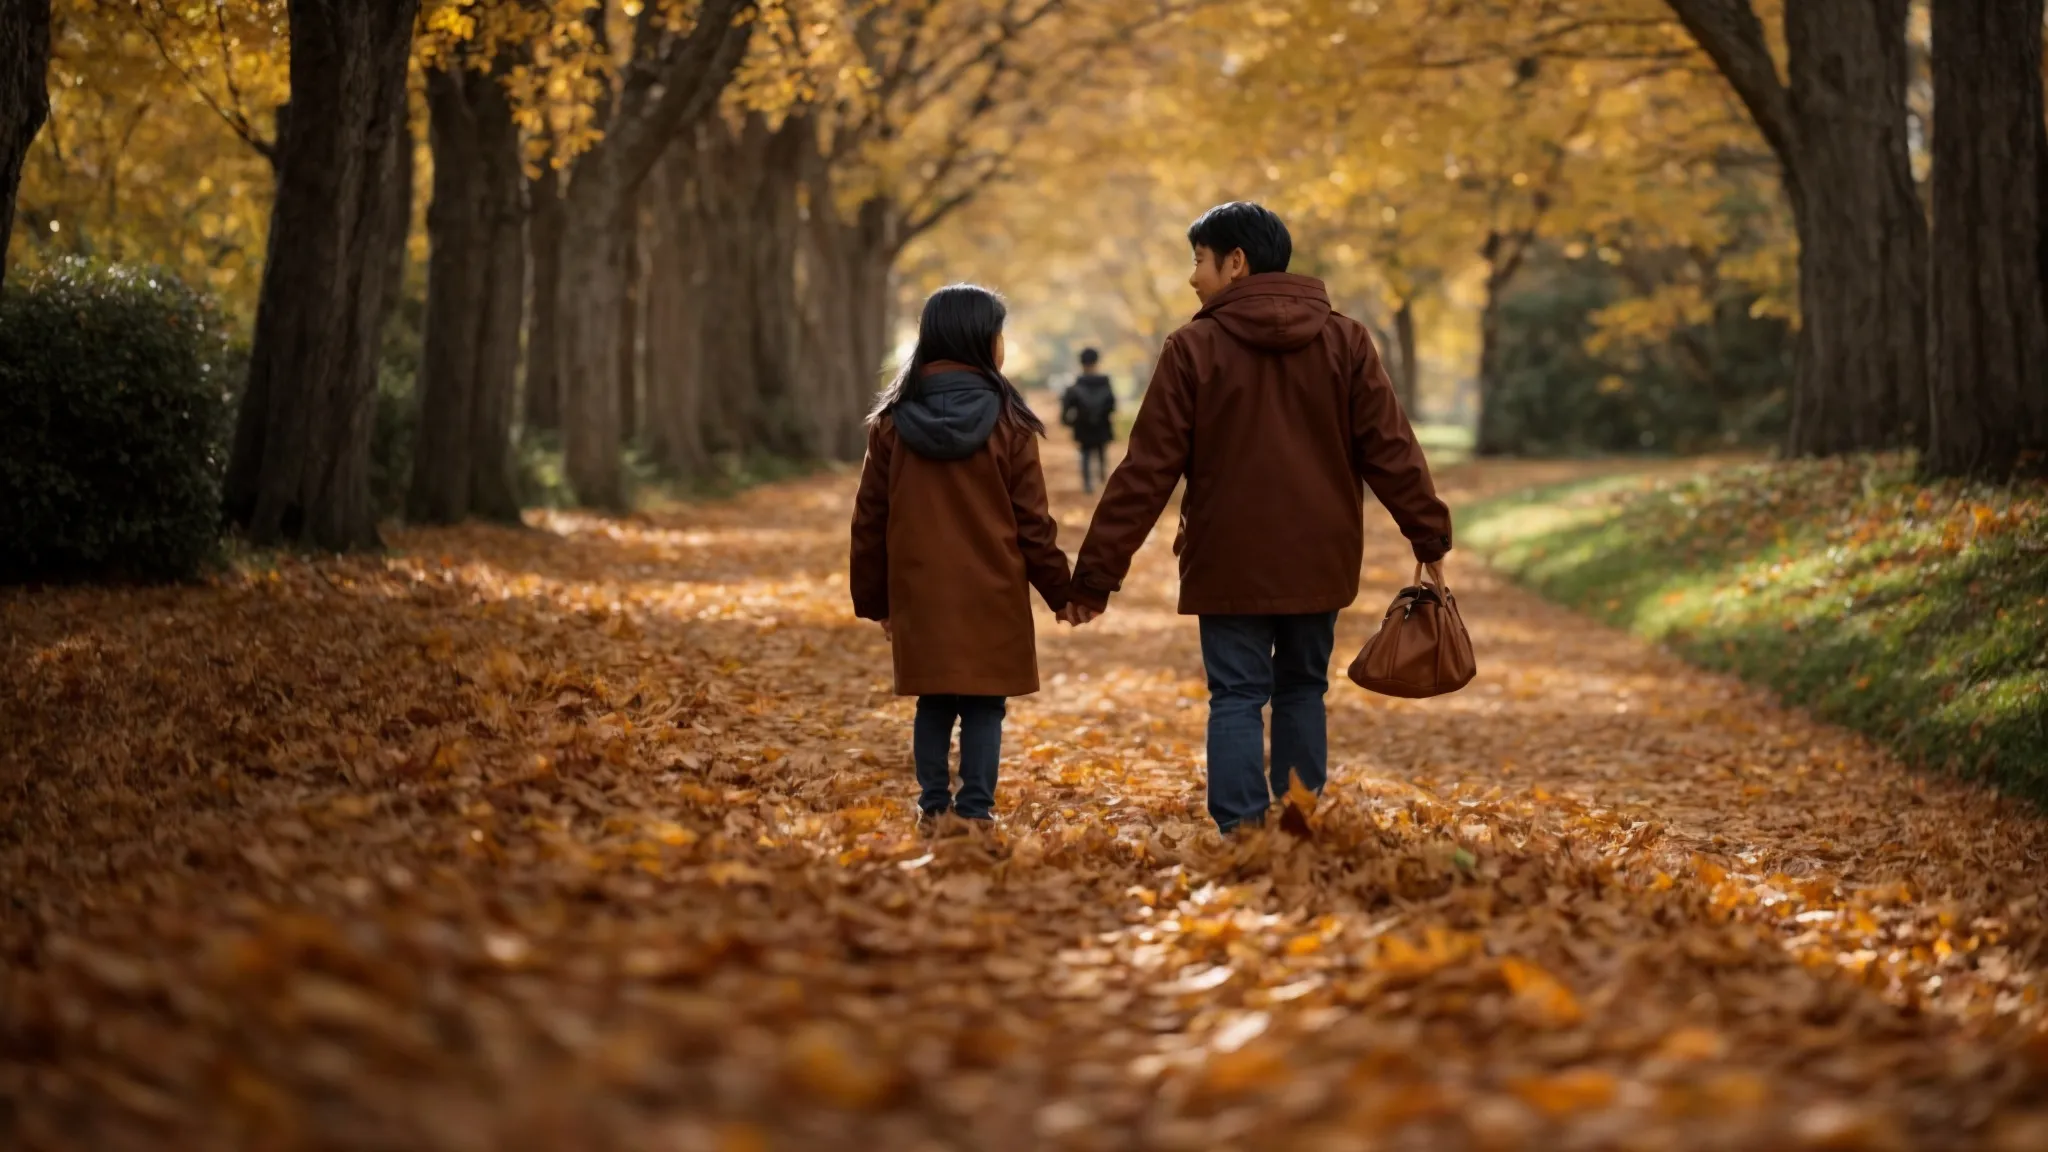 a parent and child walk side by side along a leaf-strewn path, with the child looking up in admiration as the parent gestures animatedly.